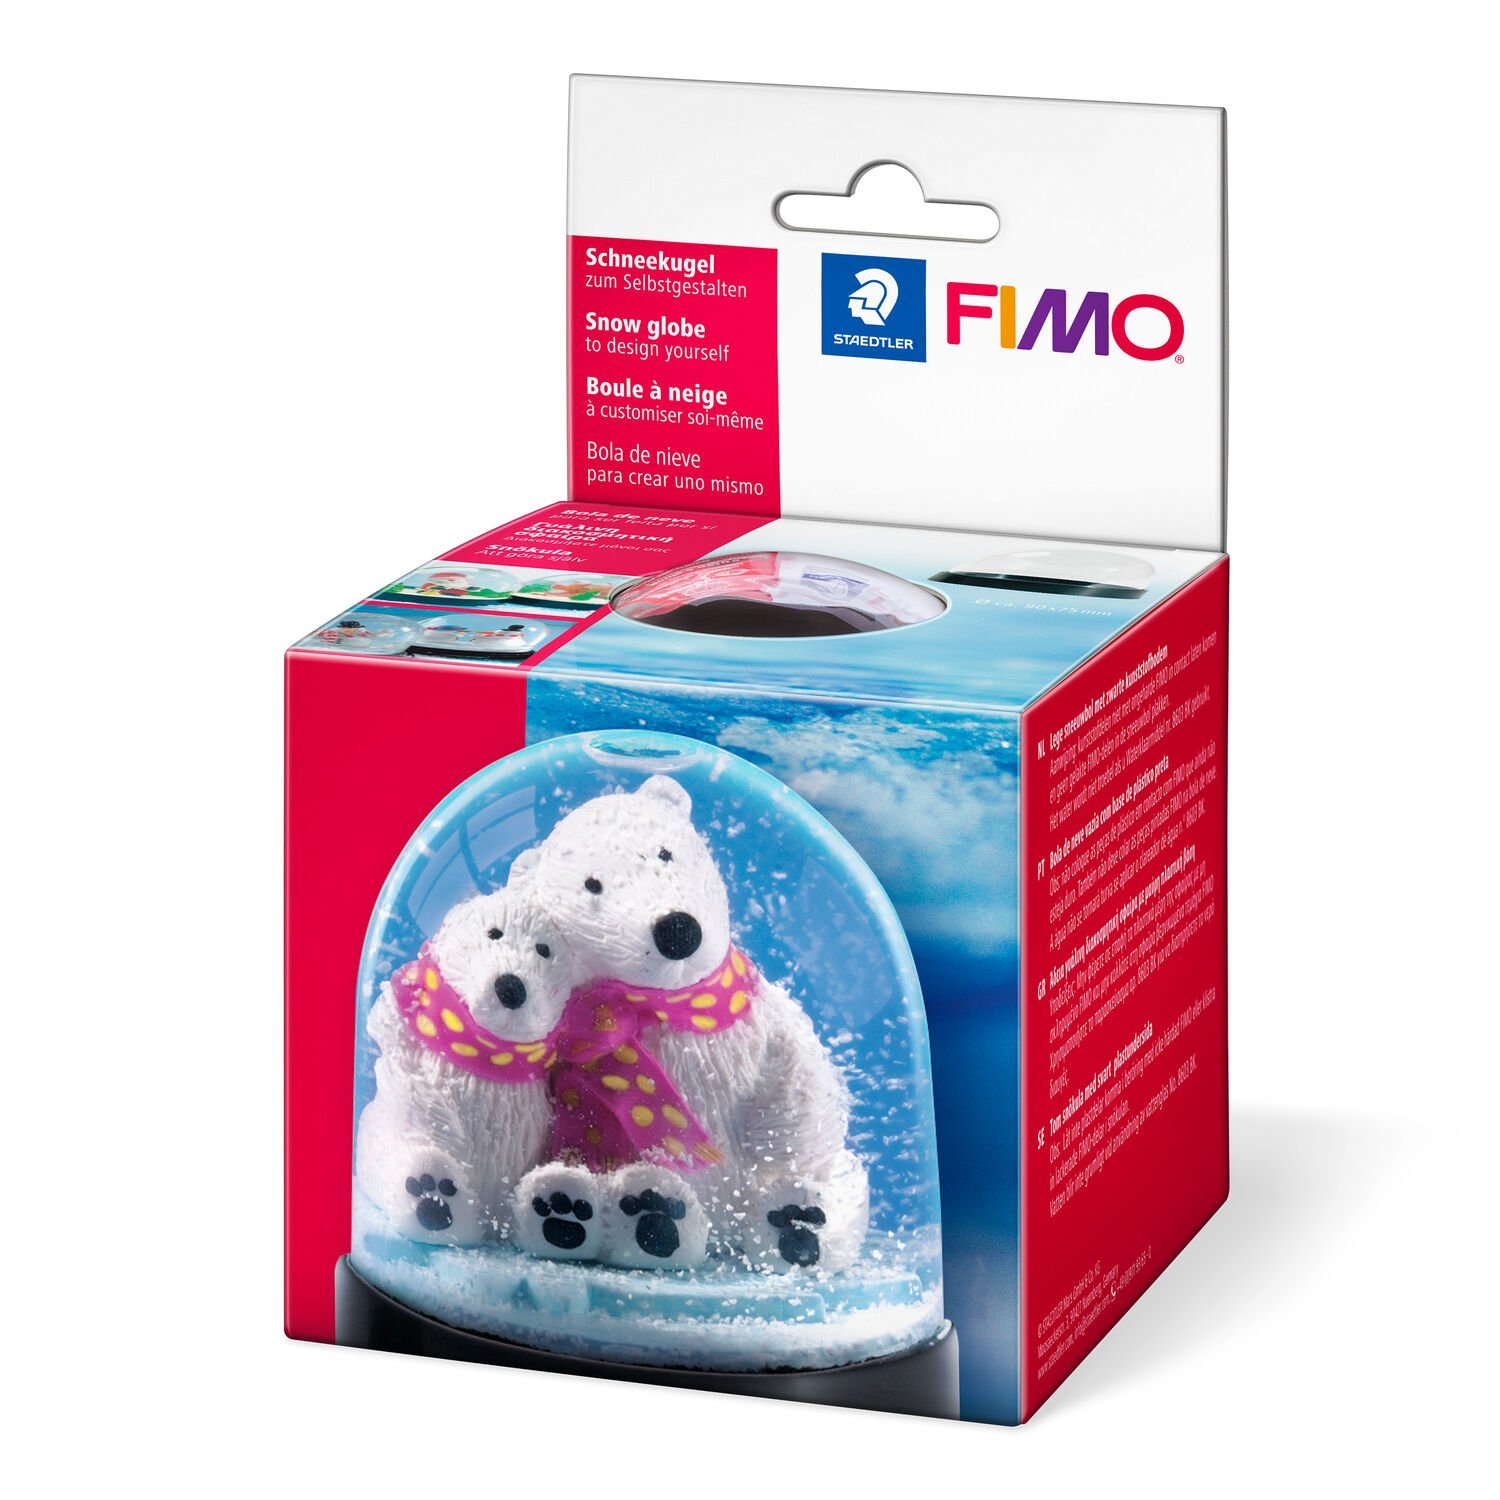 Cardboard box with 1 snow globe (round), Dimension: approx. 86 x 75 mm, detailed instructions